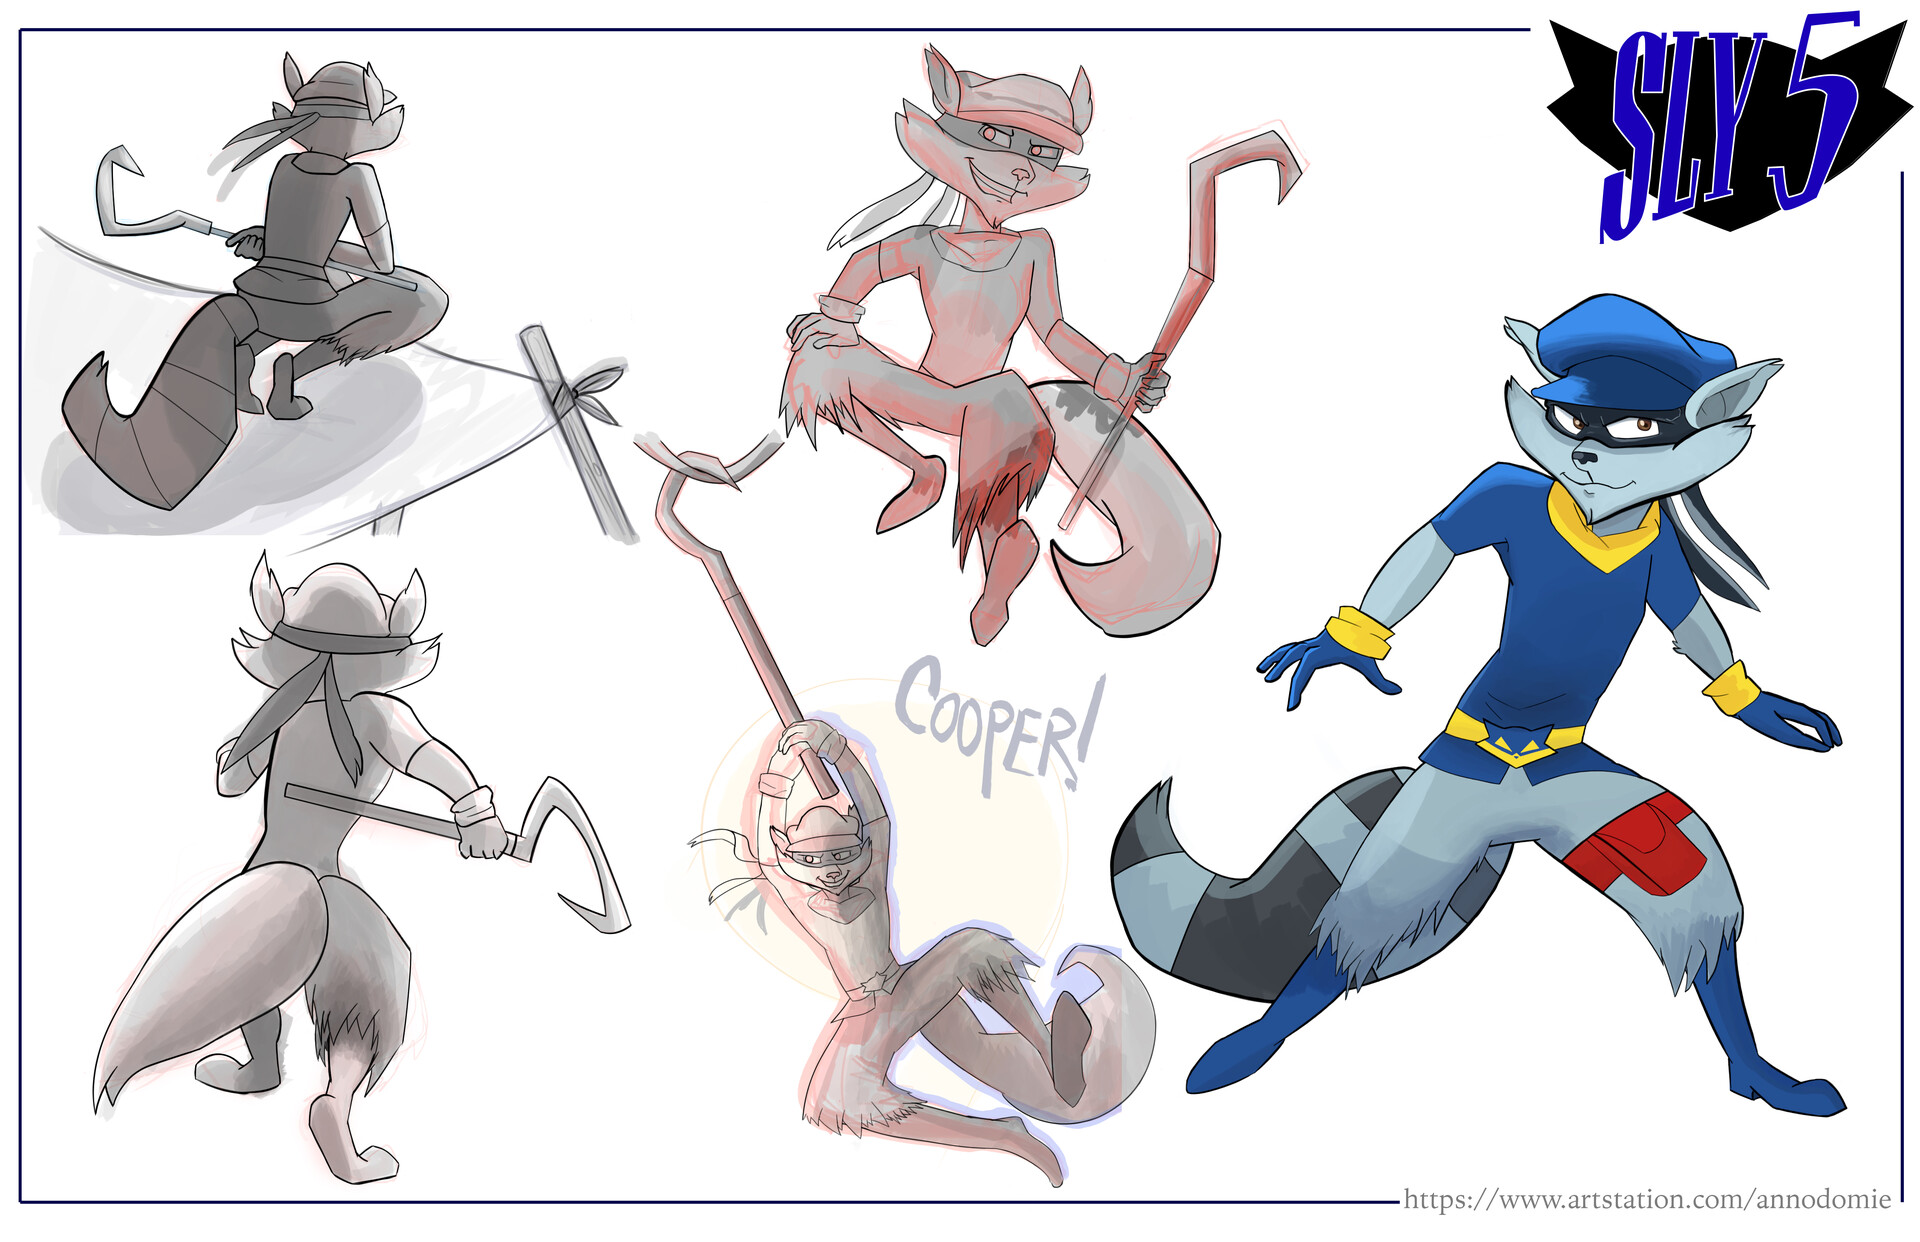 Sly Cooper 5: Will We Ever Get A Sequel?